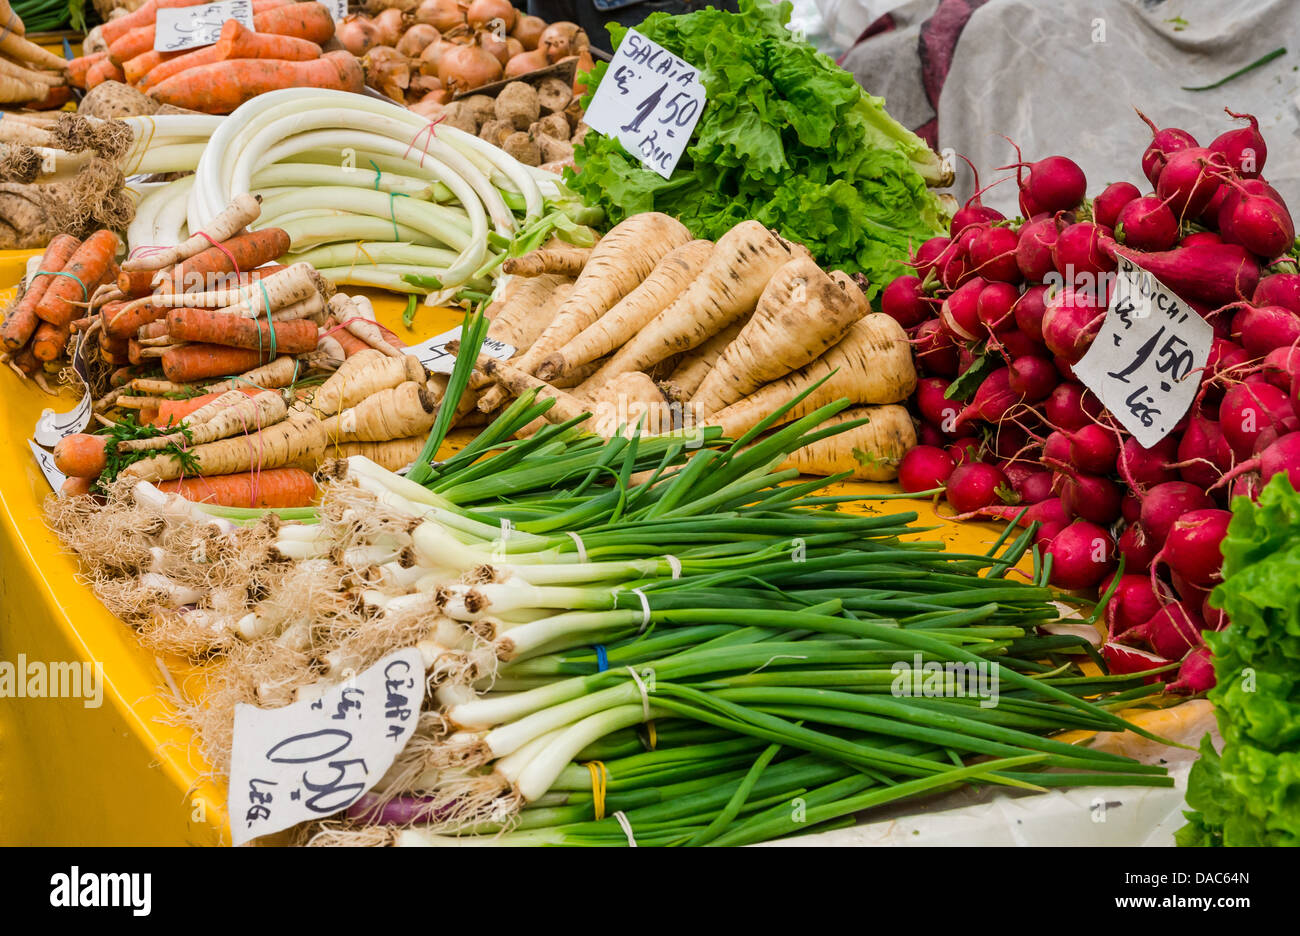 Vegetable stand at a marketplace in Brasov, Romania. Stock Photo